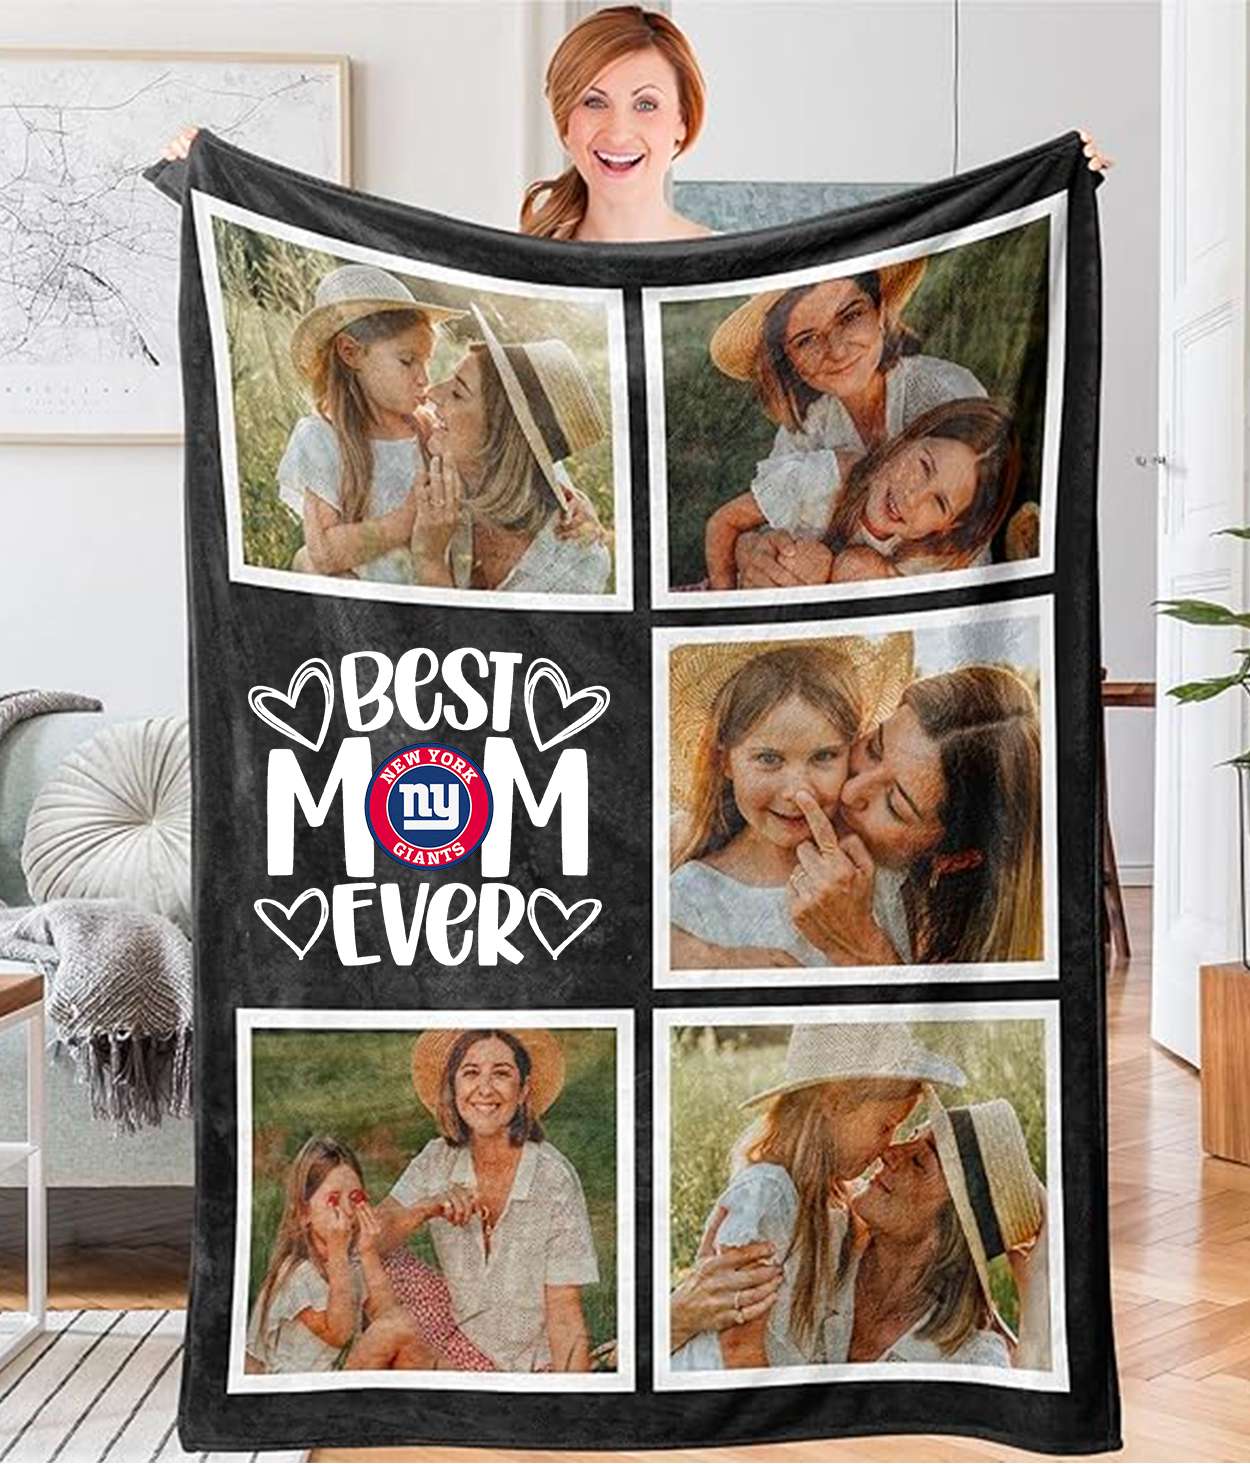 Best Mom Ever - Custom NFL New York Giants Blankets with Pictures for Mother's Day Gift